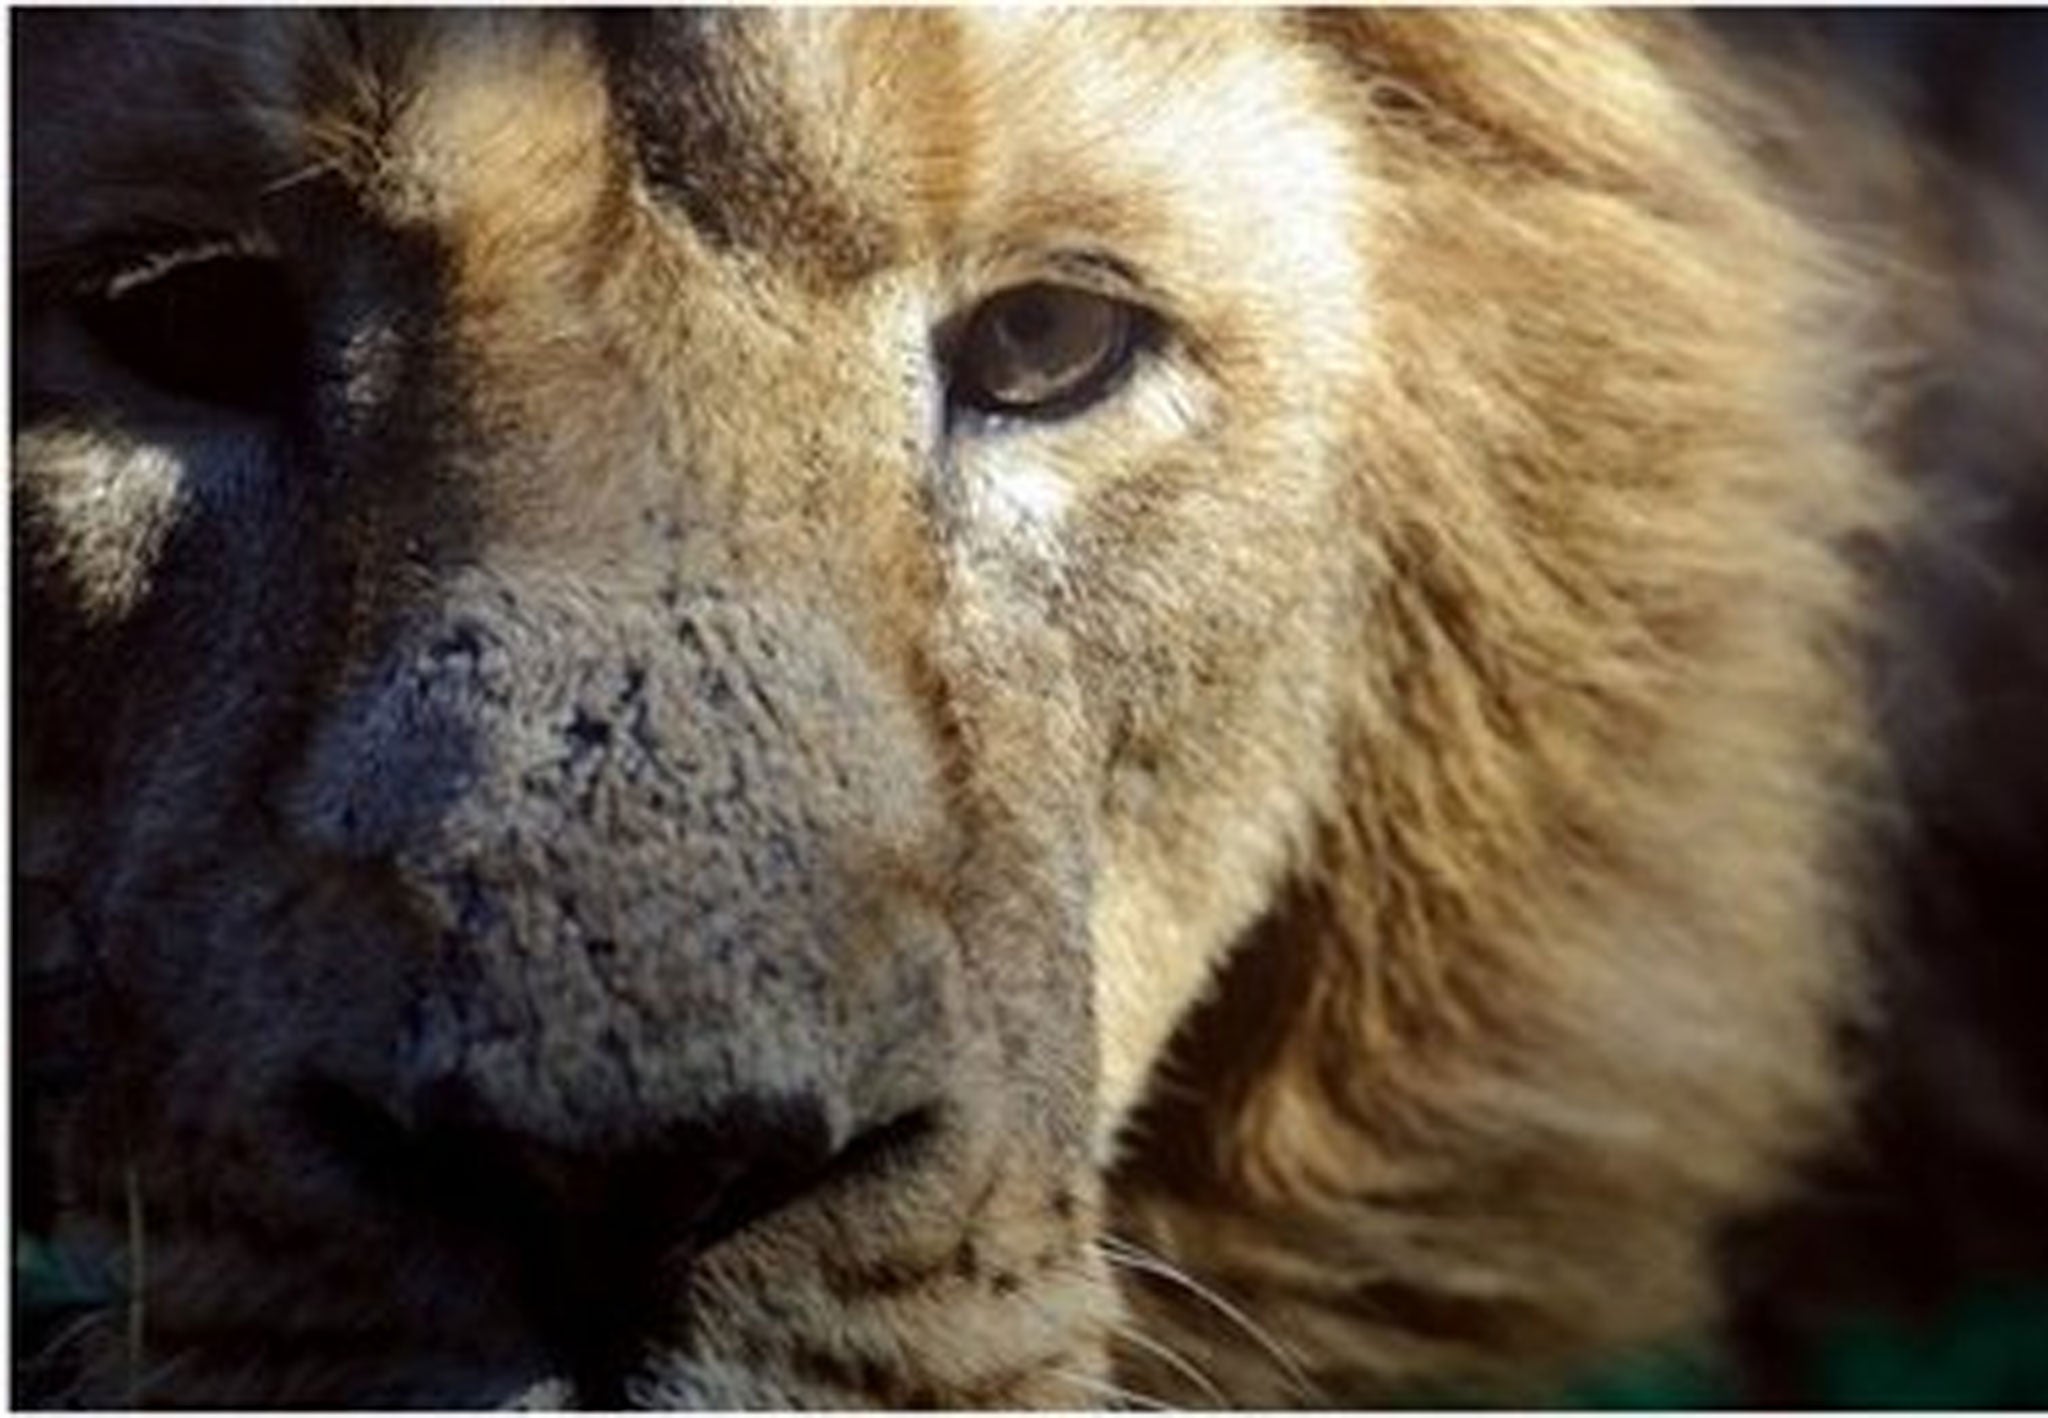 Dallas Zoo has launched an investigation into why a male lion attacked and killed a lioness in front of hundreds of visitors.